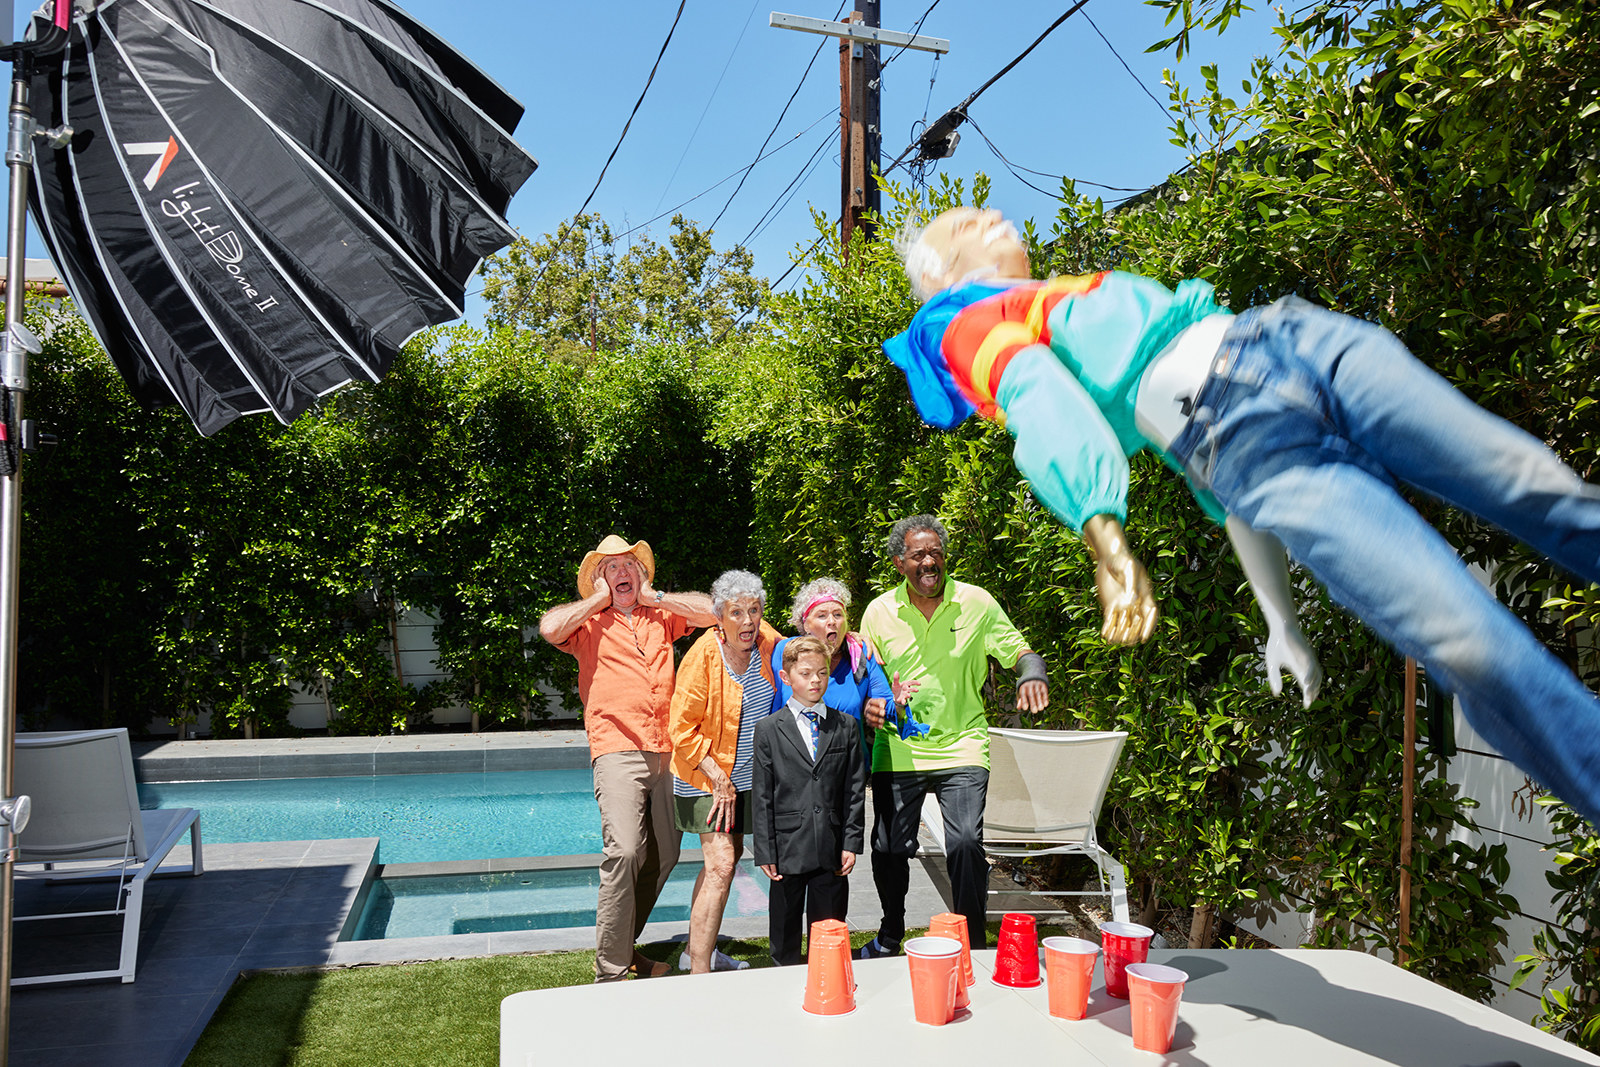 Older people and a young boy in an 8-year-old stand outside and react as a body doll falls onto a table with red solo cups